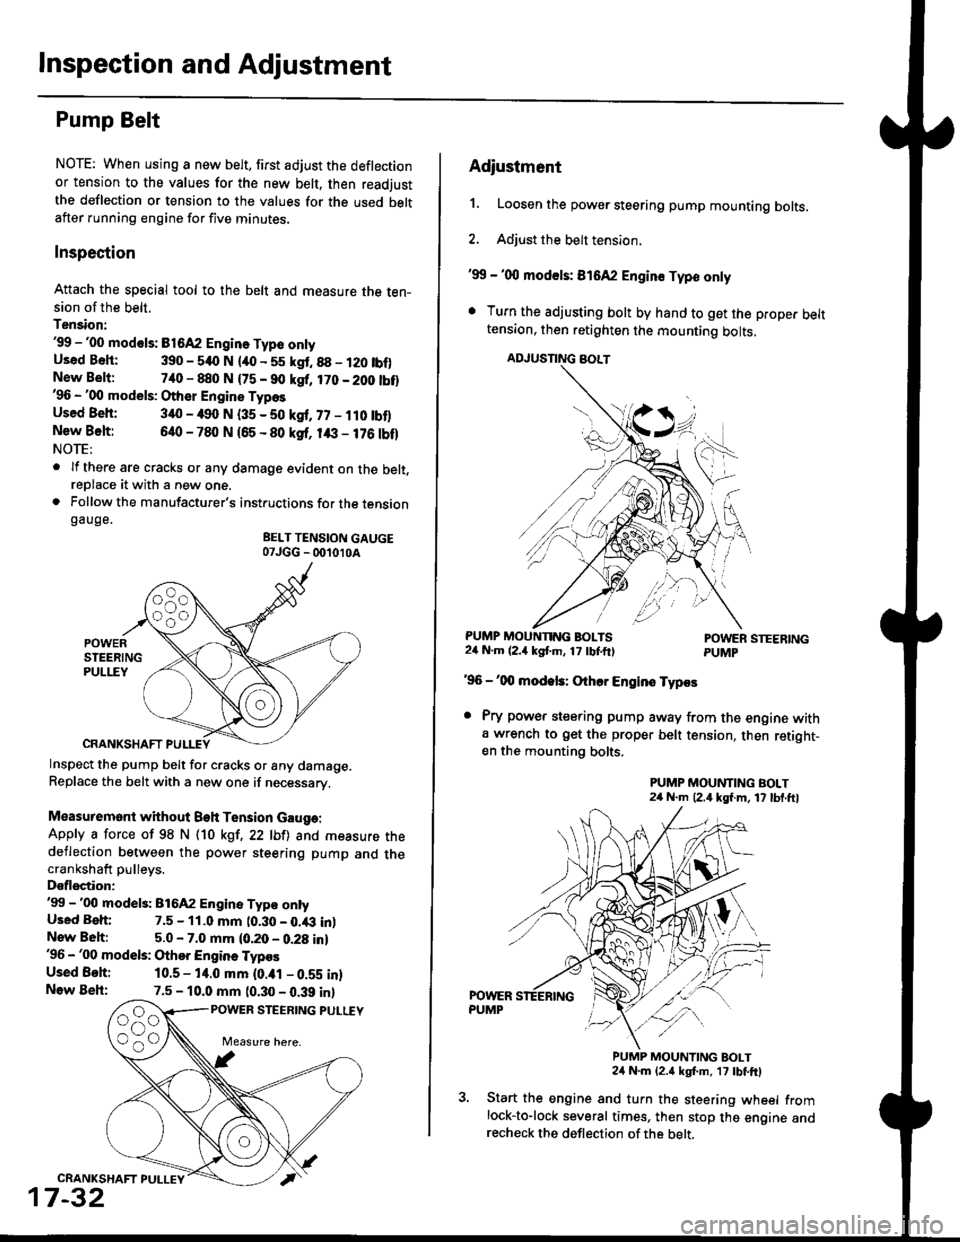 HONDA CIVIC 1997 6.G Workshop Manual Inspection and Adjustment
Pump Belt
NOTE: When using a new belt, first adjust the deflection
or tension to the values for the new belt, then readjust
the deflection or tension to the values for the us